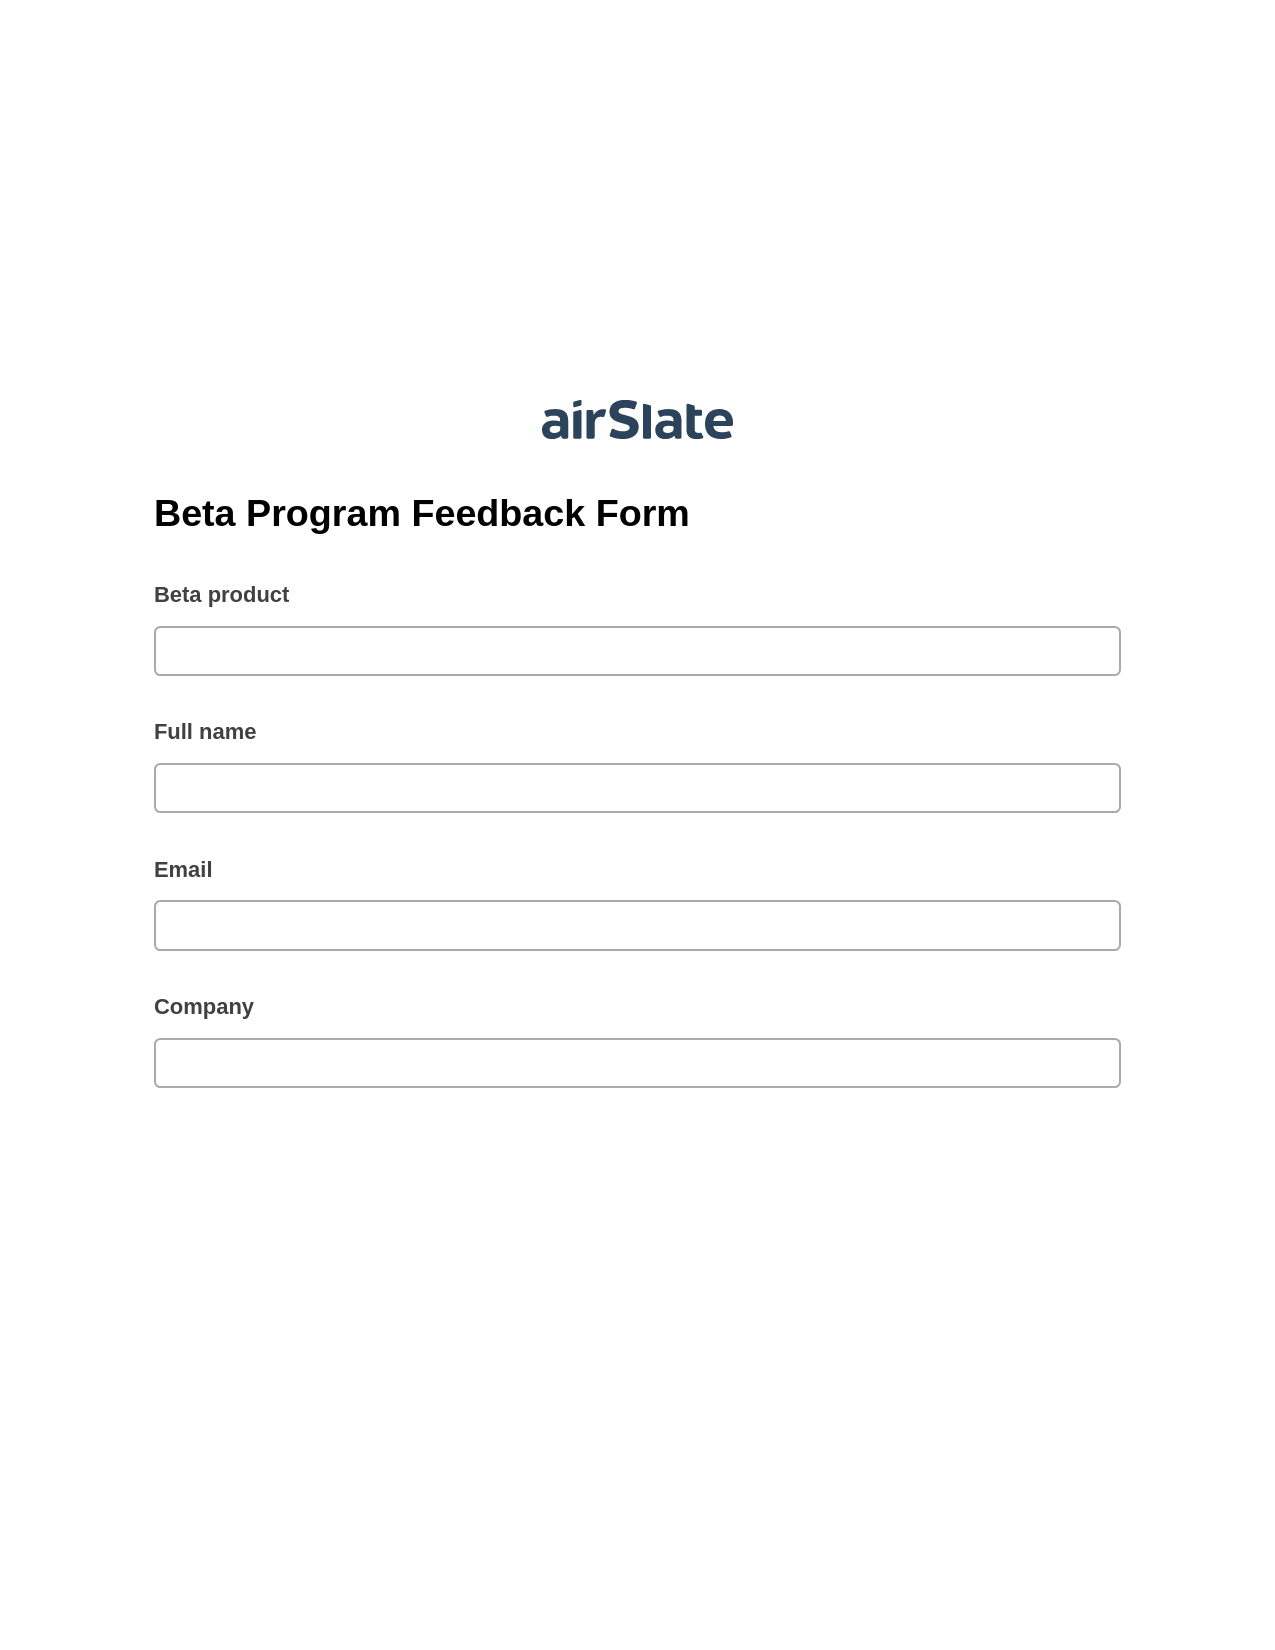 Beta Program Feedback Form Pre-fill from CSV File Bot, Send a Slate with Roles Bot, Slack Two-Way Binding Bot